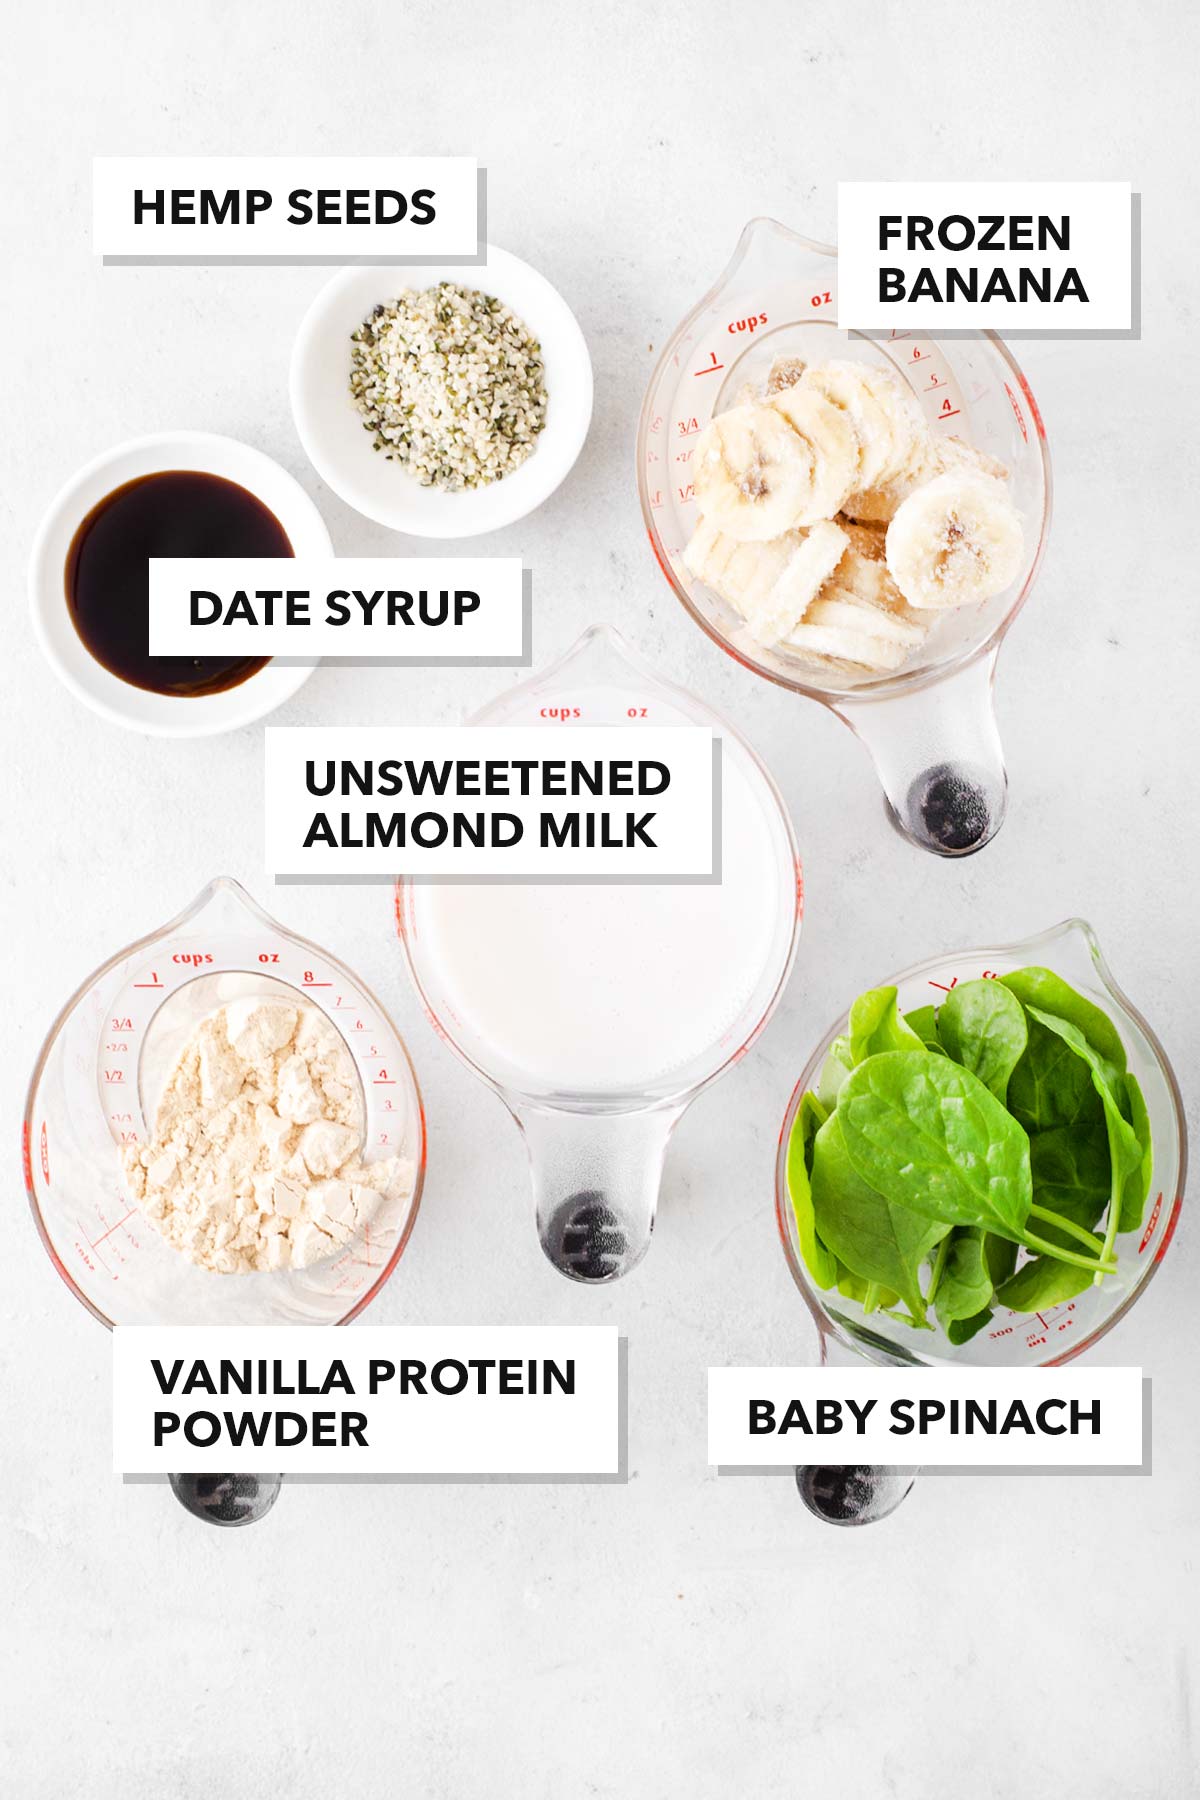 Ingredients for a green protein smoothie.